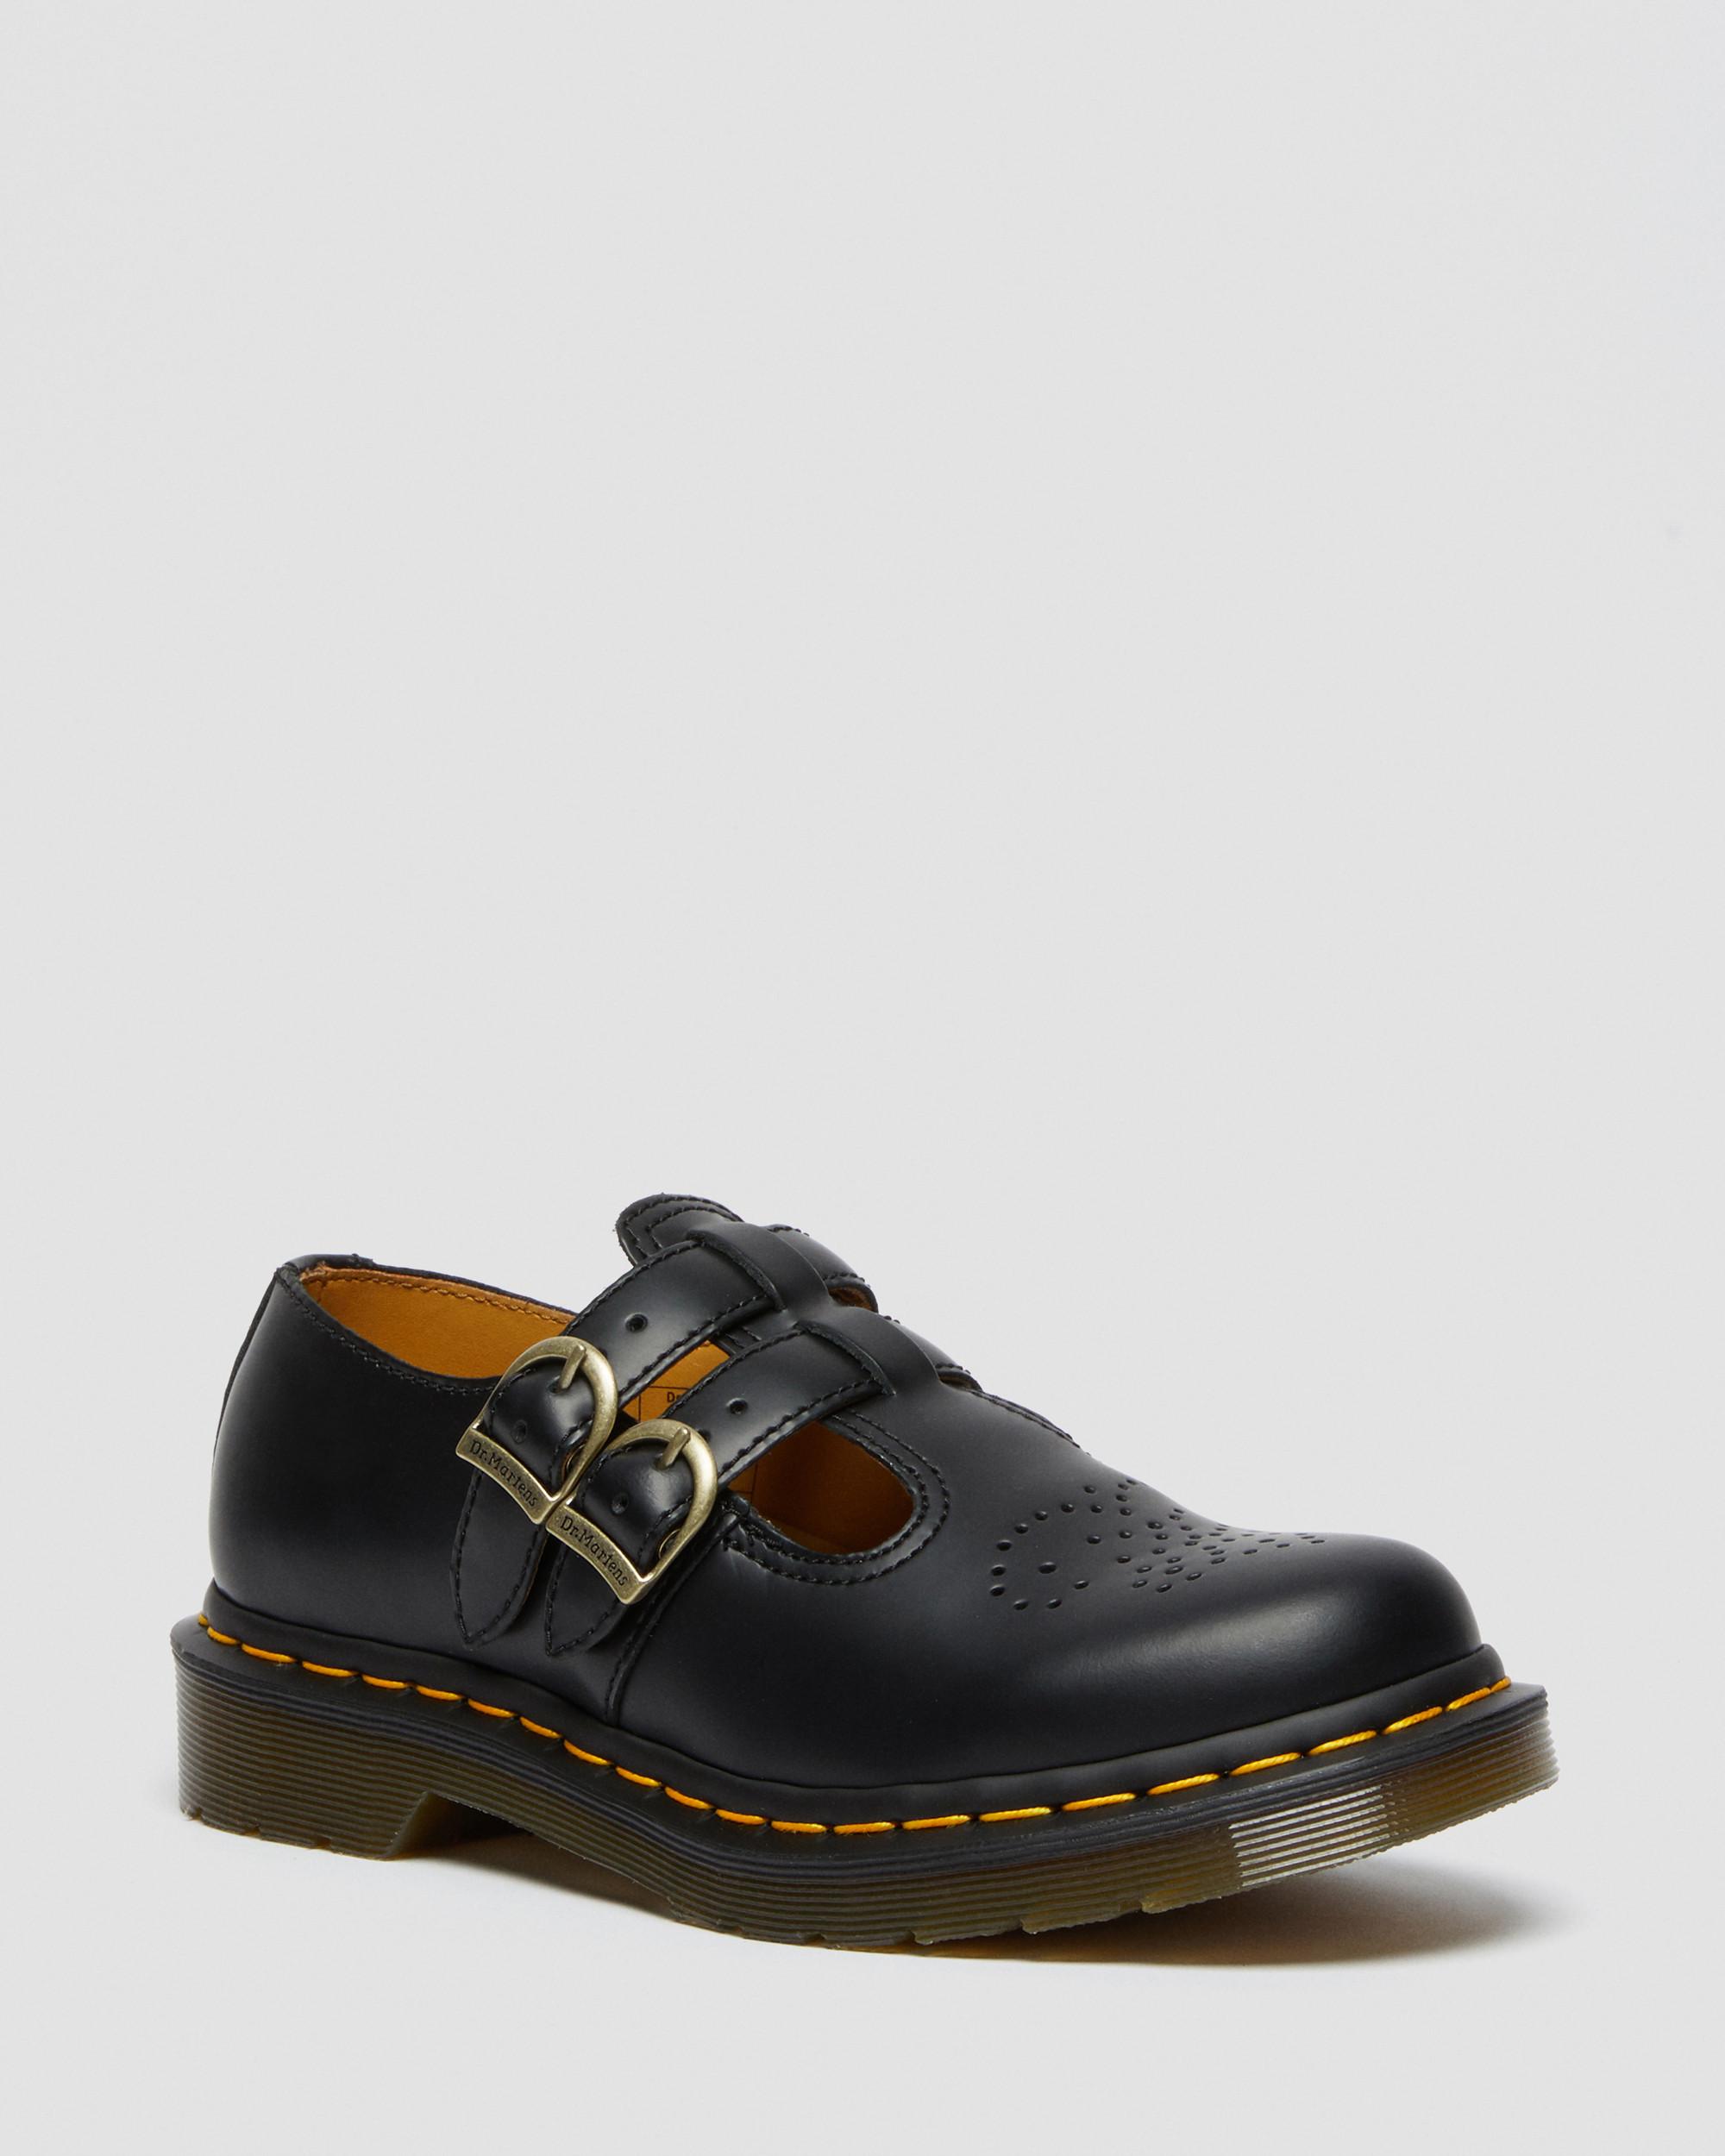 Women's Mary Jane Shoes | Dr. Martens